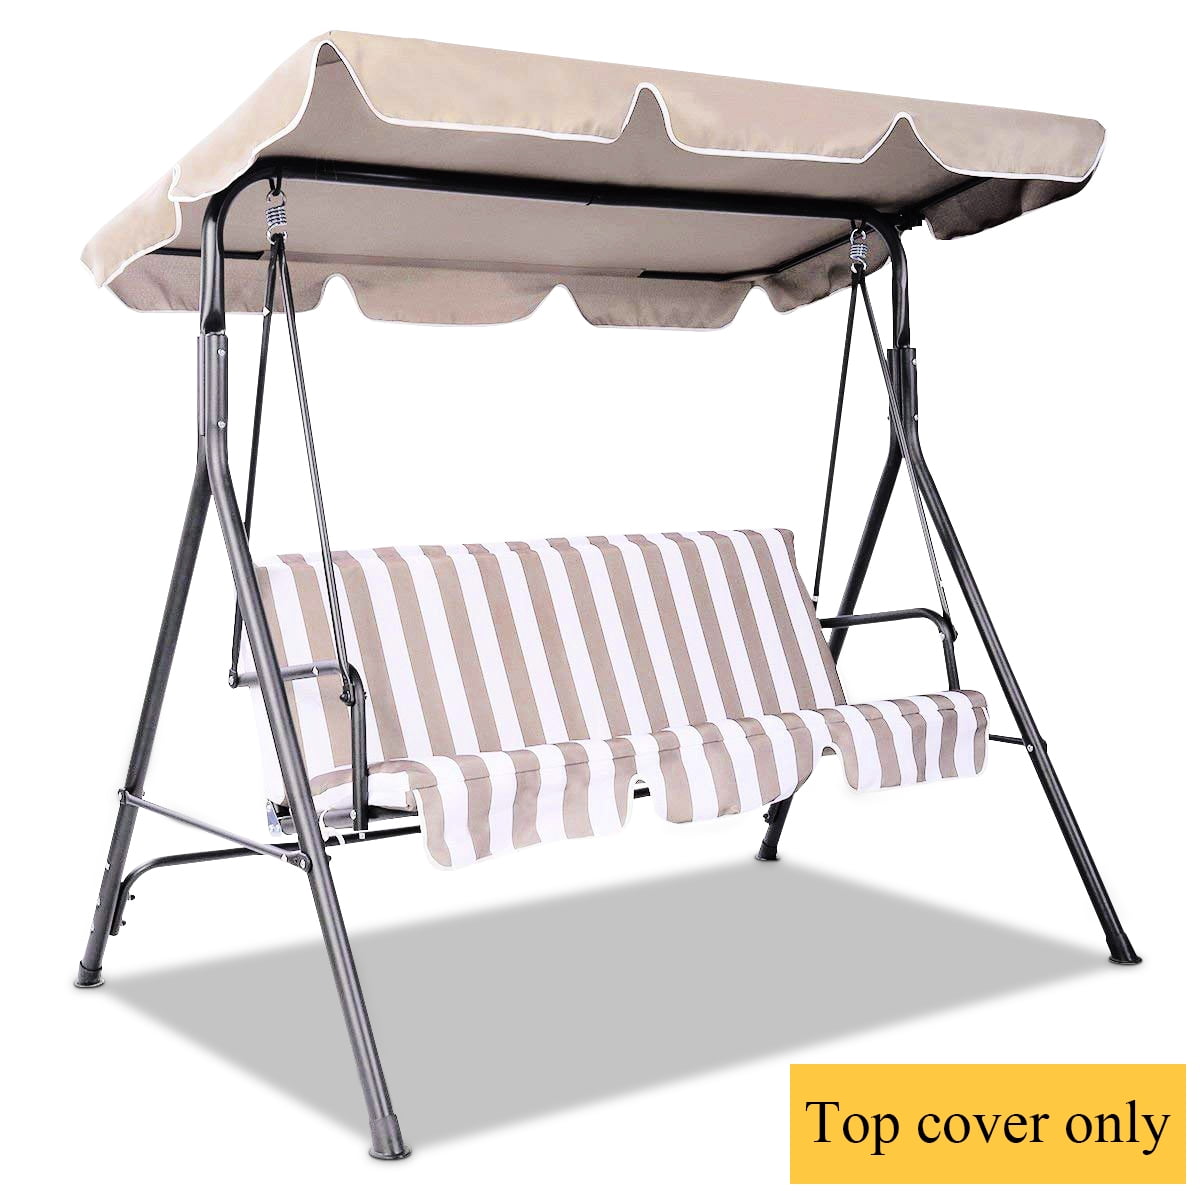 New Patio 77"x43" Swing Canopy Replacement Porch Top Cover Seat Furniture 